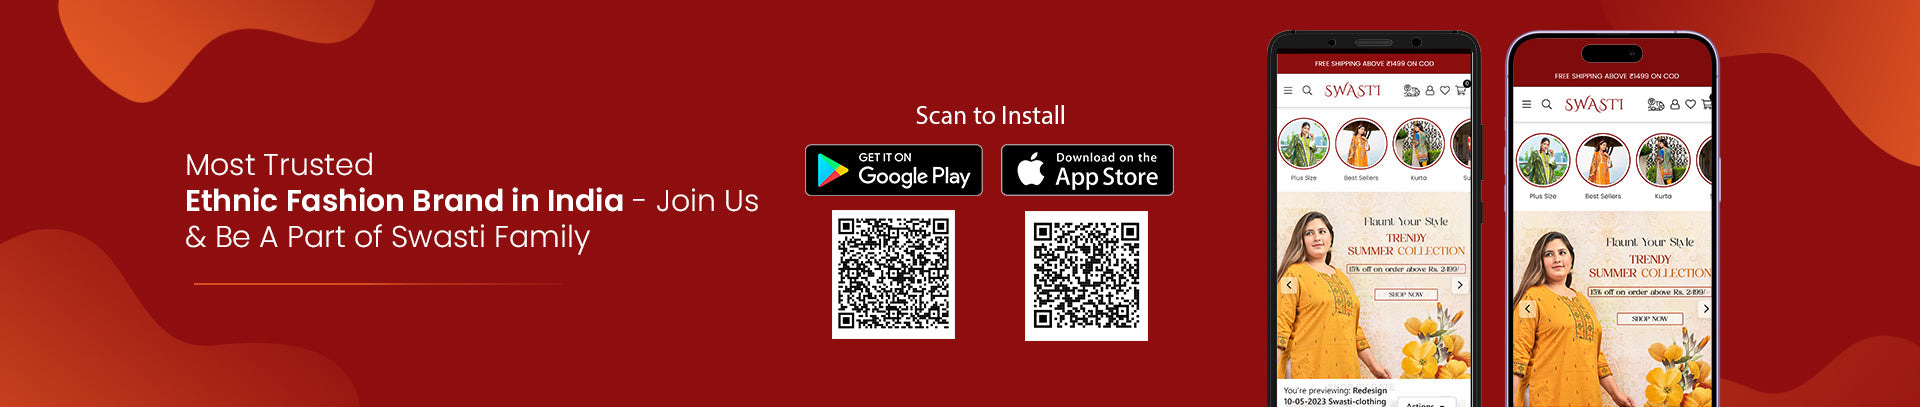 Bar codes to download swasti app from Google Play store and Apple App store